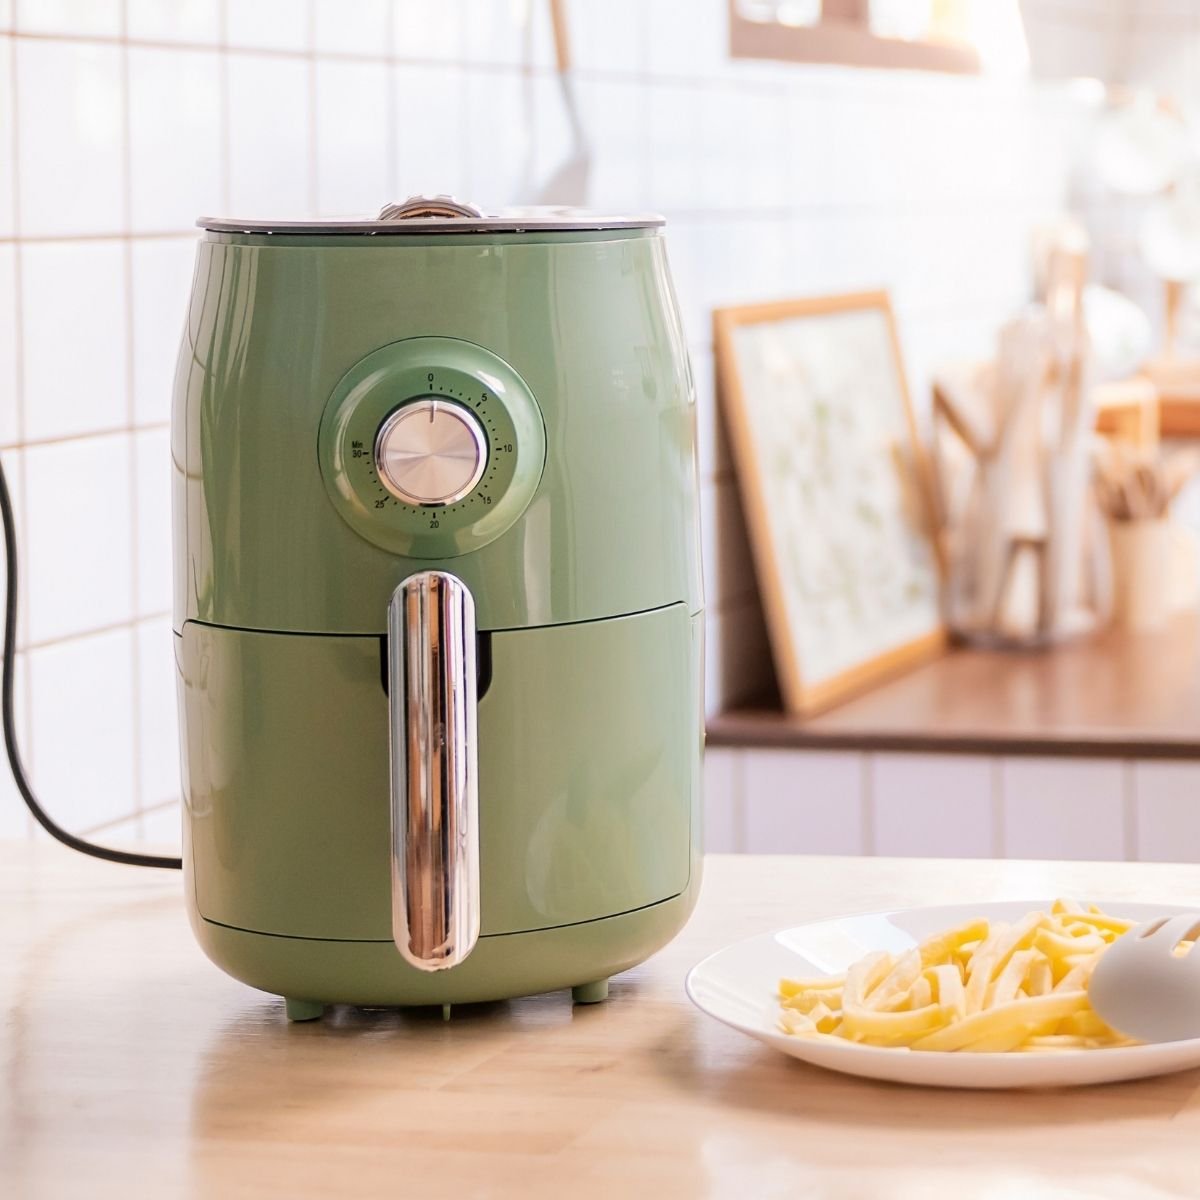 6 Benefits of An Air Fryer: Why You Need One